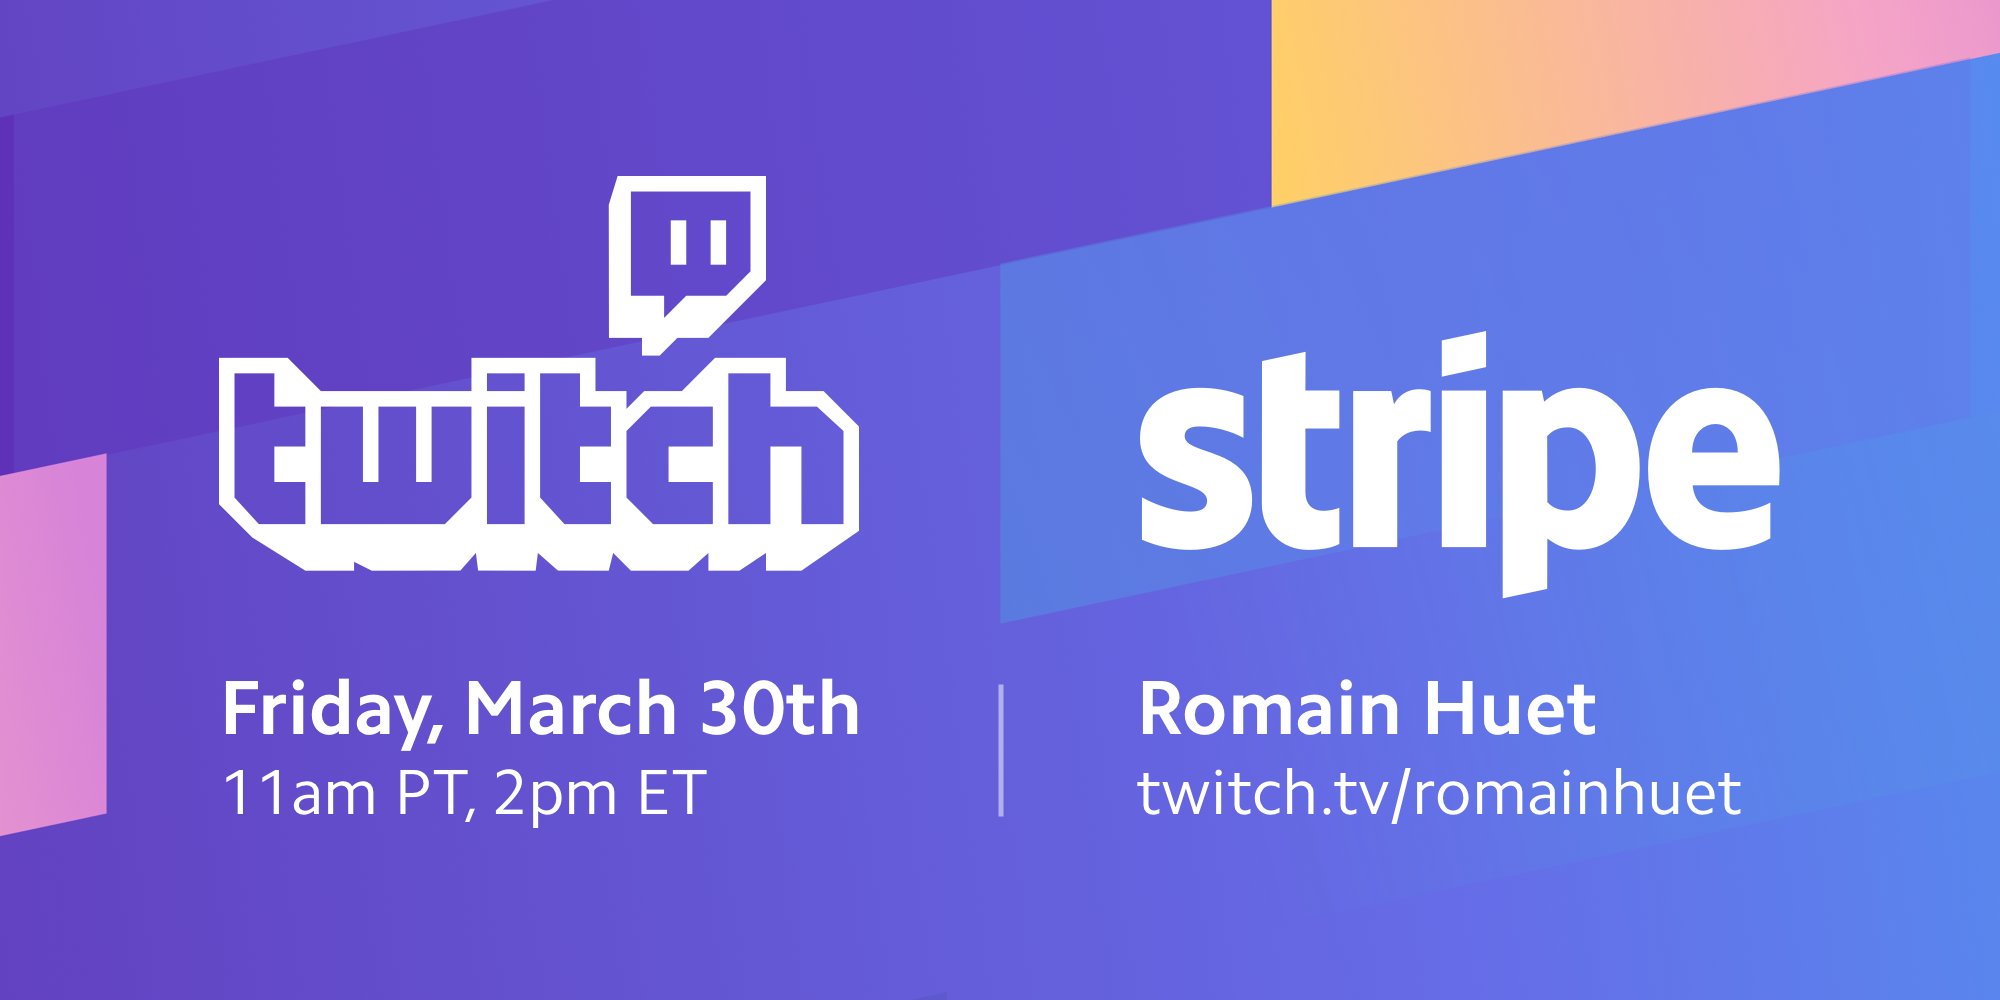 Romain Huet I Ll Be Live Coding On Twitch On Friday Tune In To Learn How To Build Great Payment Experiences On The Web With Stripe Elements Apple Pay Google Pay